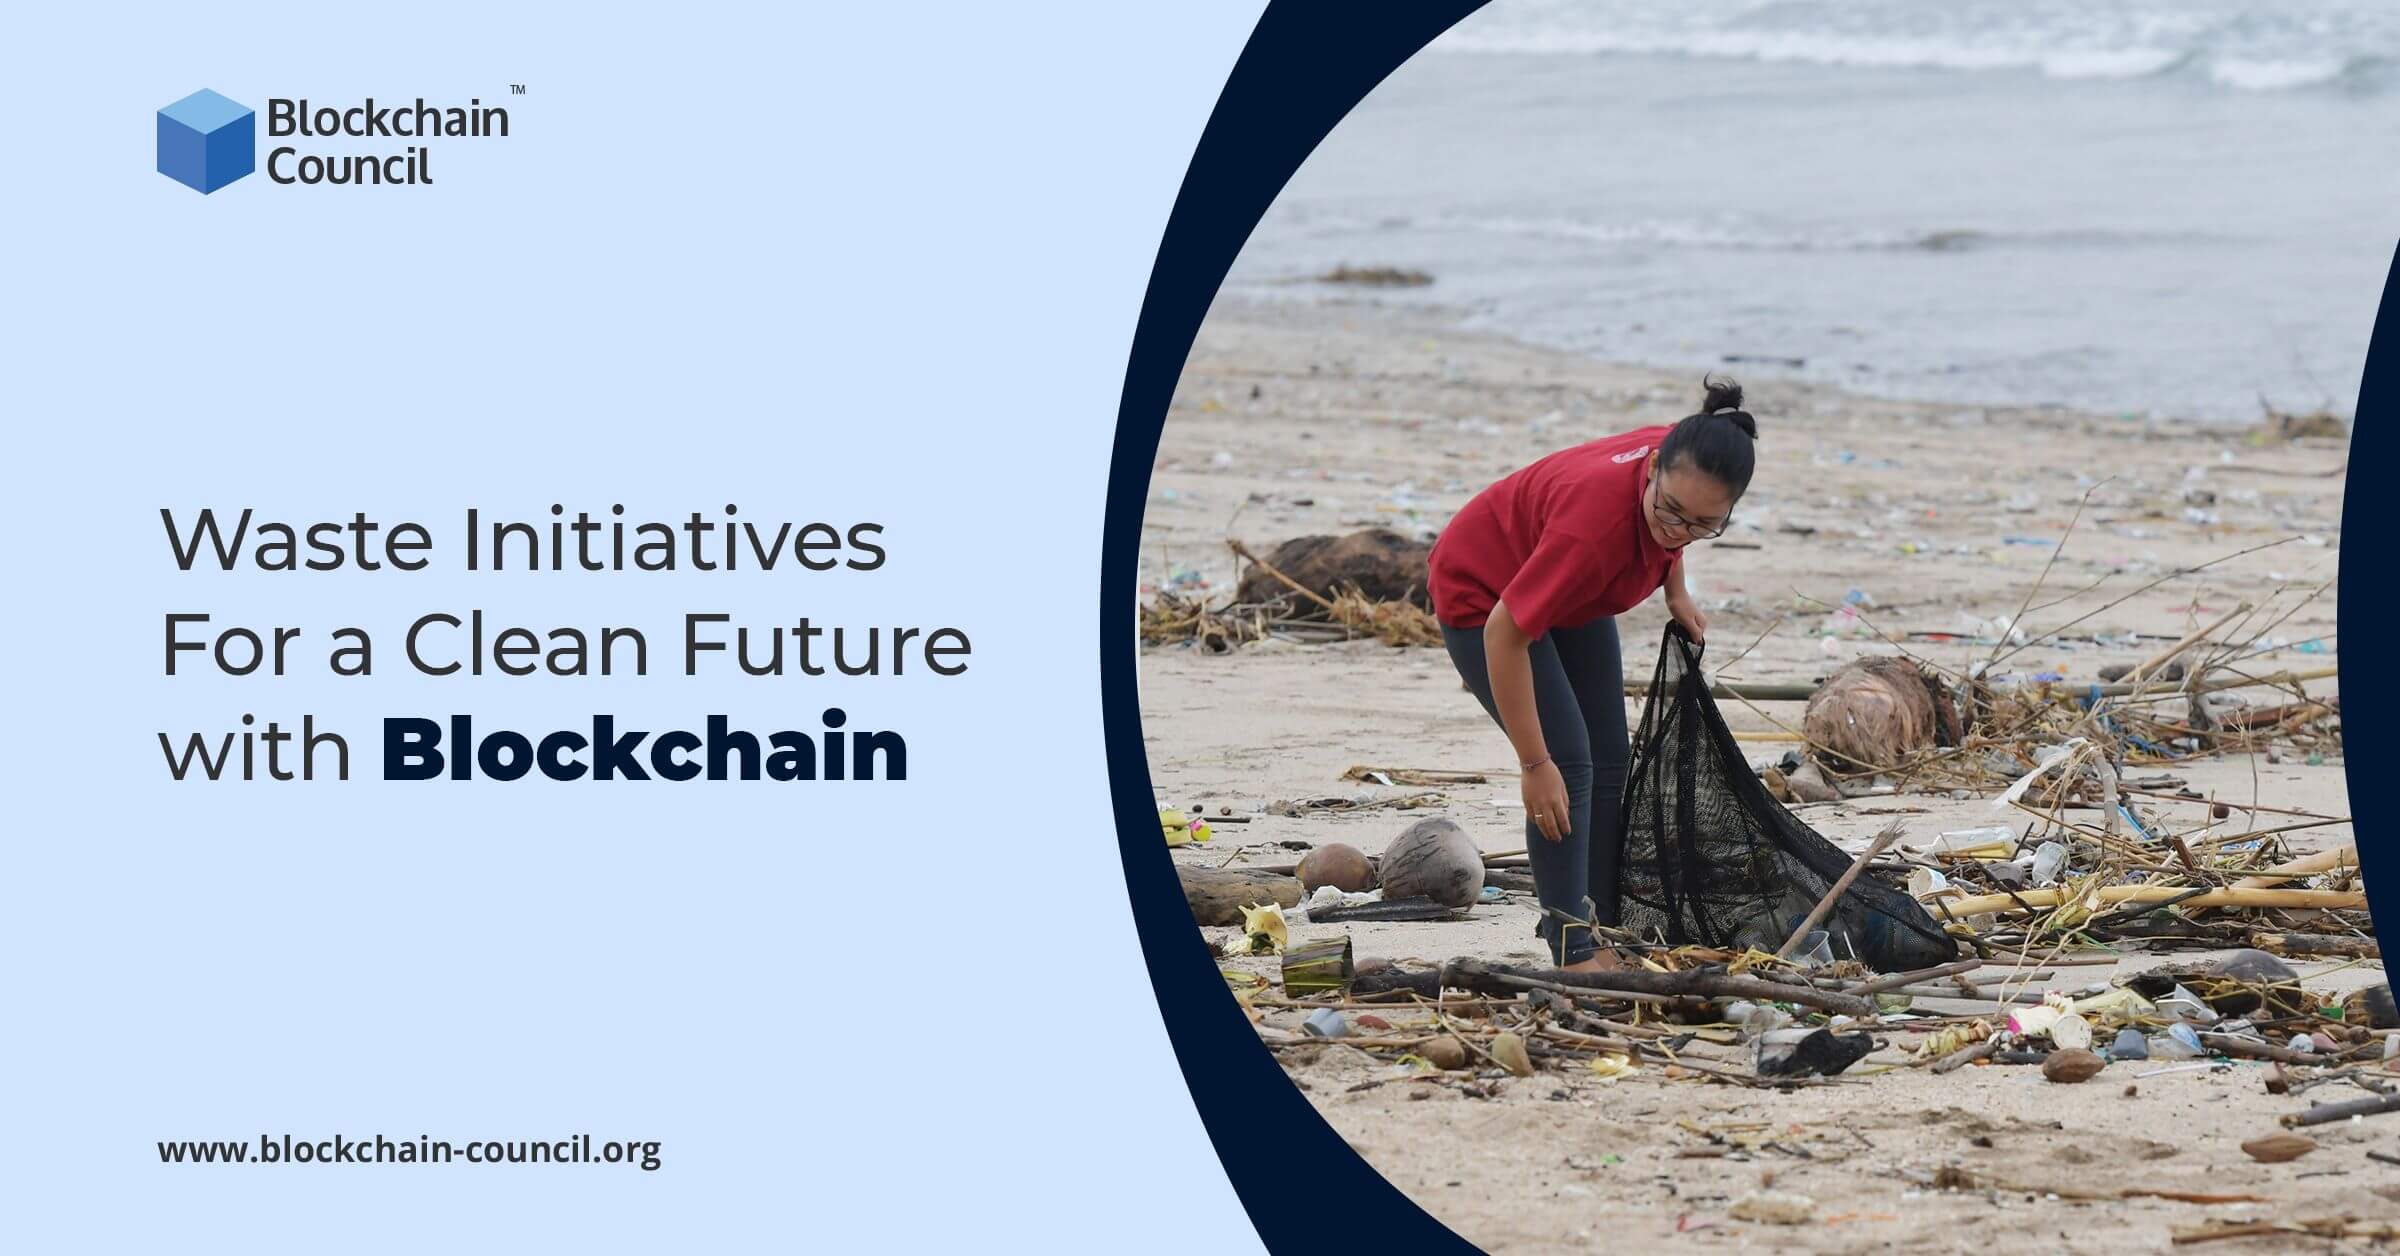 Waste Initiatives For a Clean Future with Blockchain